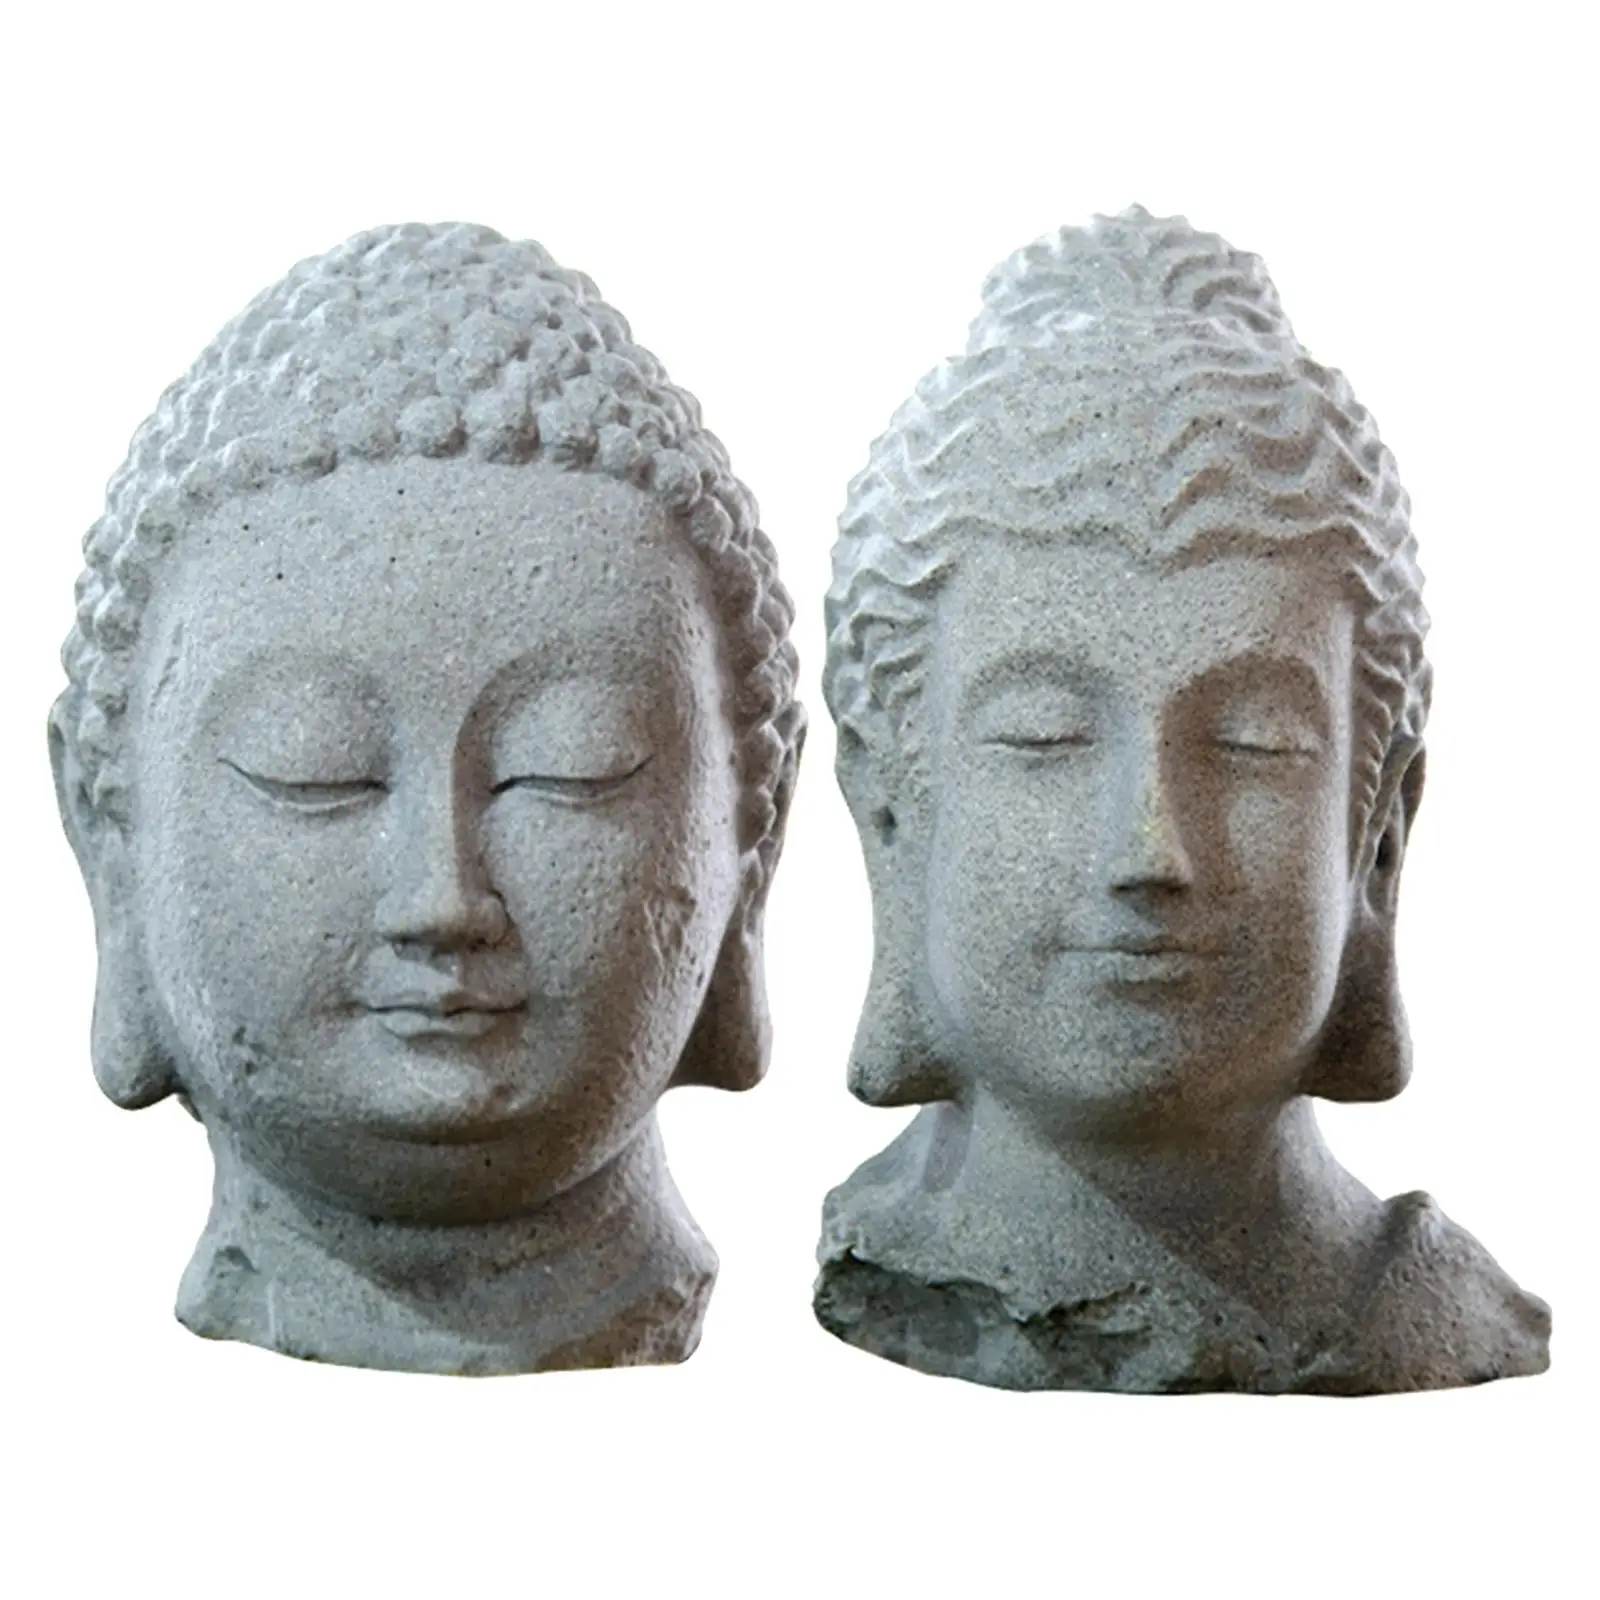 Resin Fish Tank Buddha Head Statue Home Decor Durable Collection Accessories Easily for Yoga Room, Smooth Surface